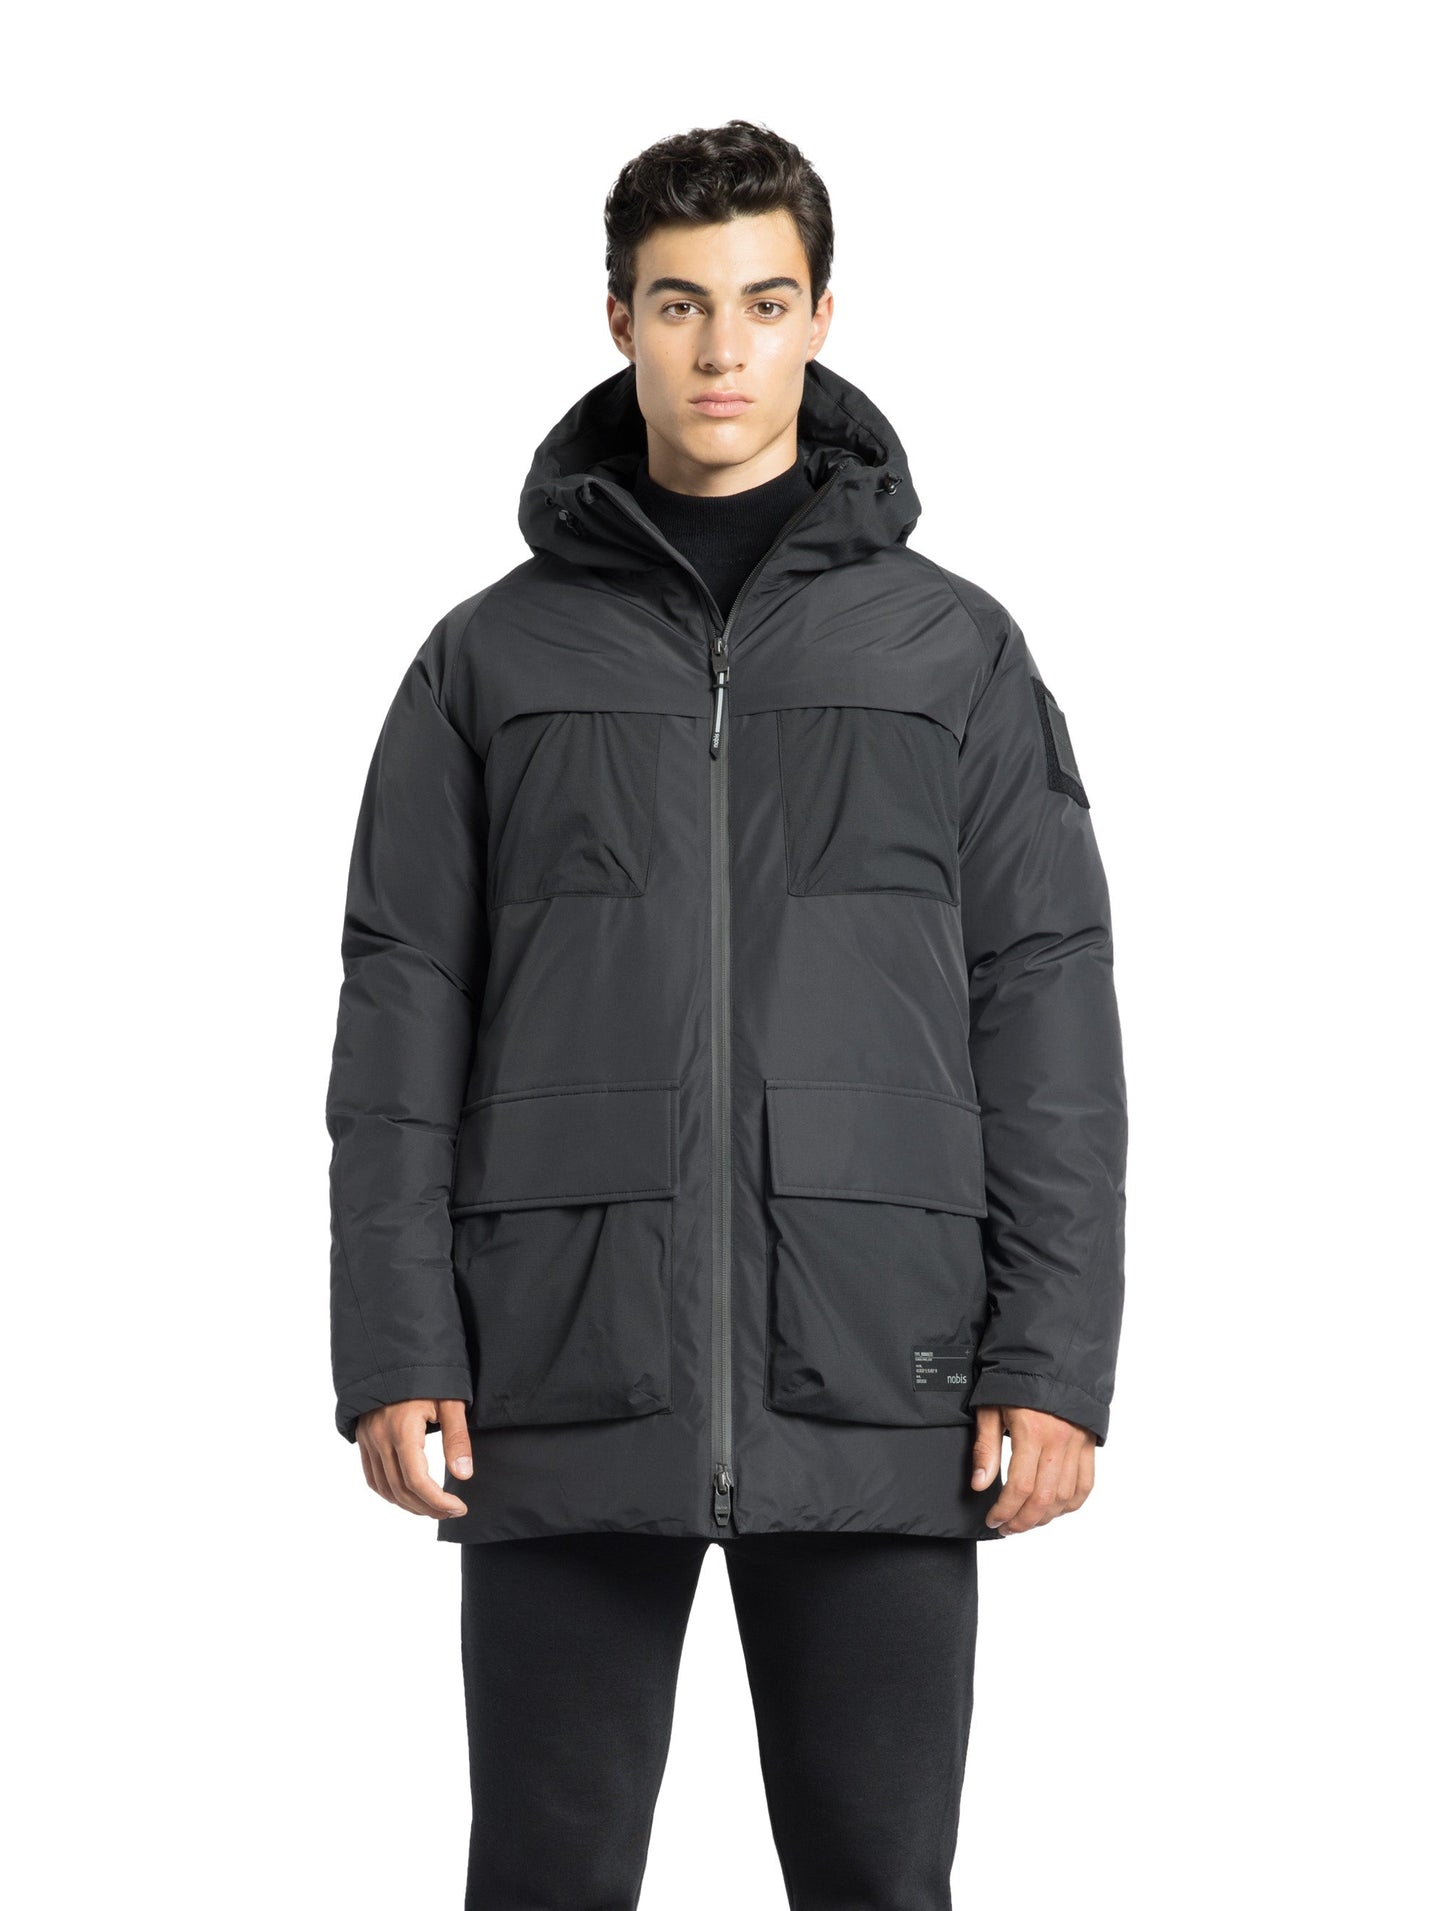 Ronin Men's Performance Utility Jacket in thigh length, premium 3-ply micro denier and stretch ripstop fabrication, Premium Canadian origin White Duck Down insulation, non-removable down-filled hood, bellow chest pockets, magnetic closure waist flap pockets, two-way centre-front zipper, pit zipper vents, hidden adjustable waist drawcord, in Black